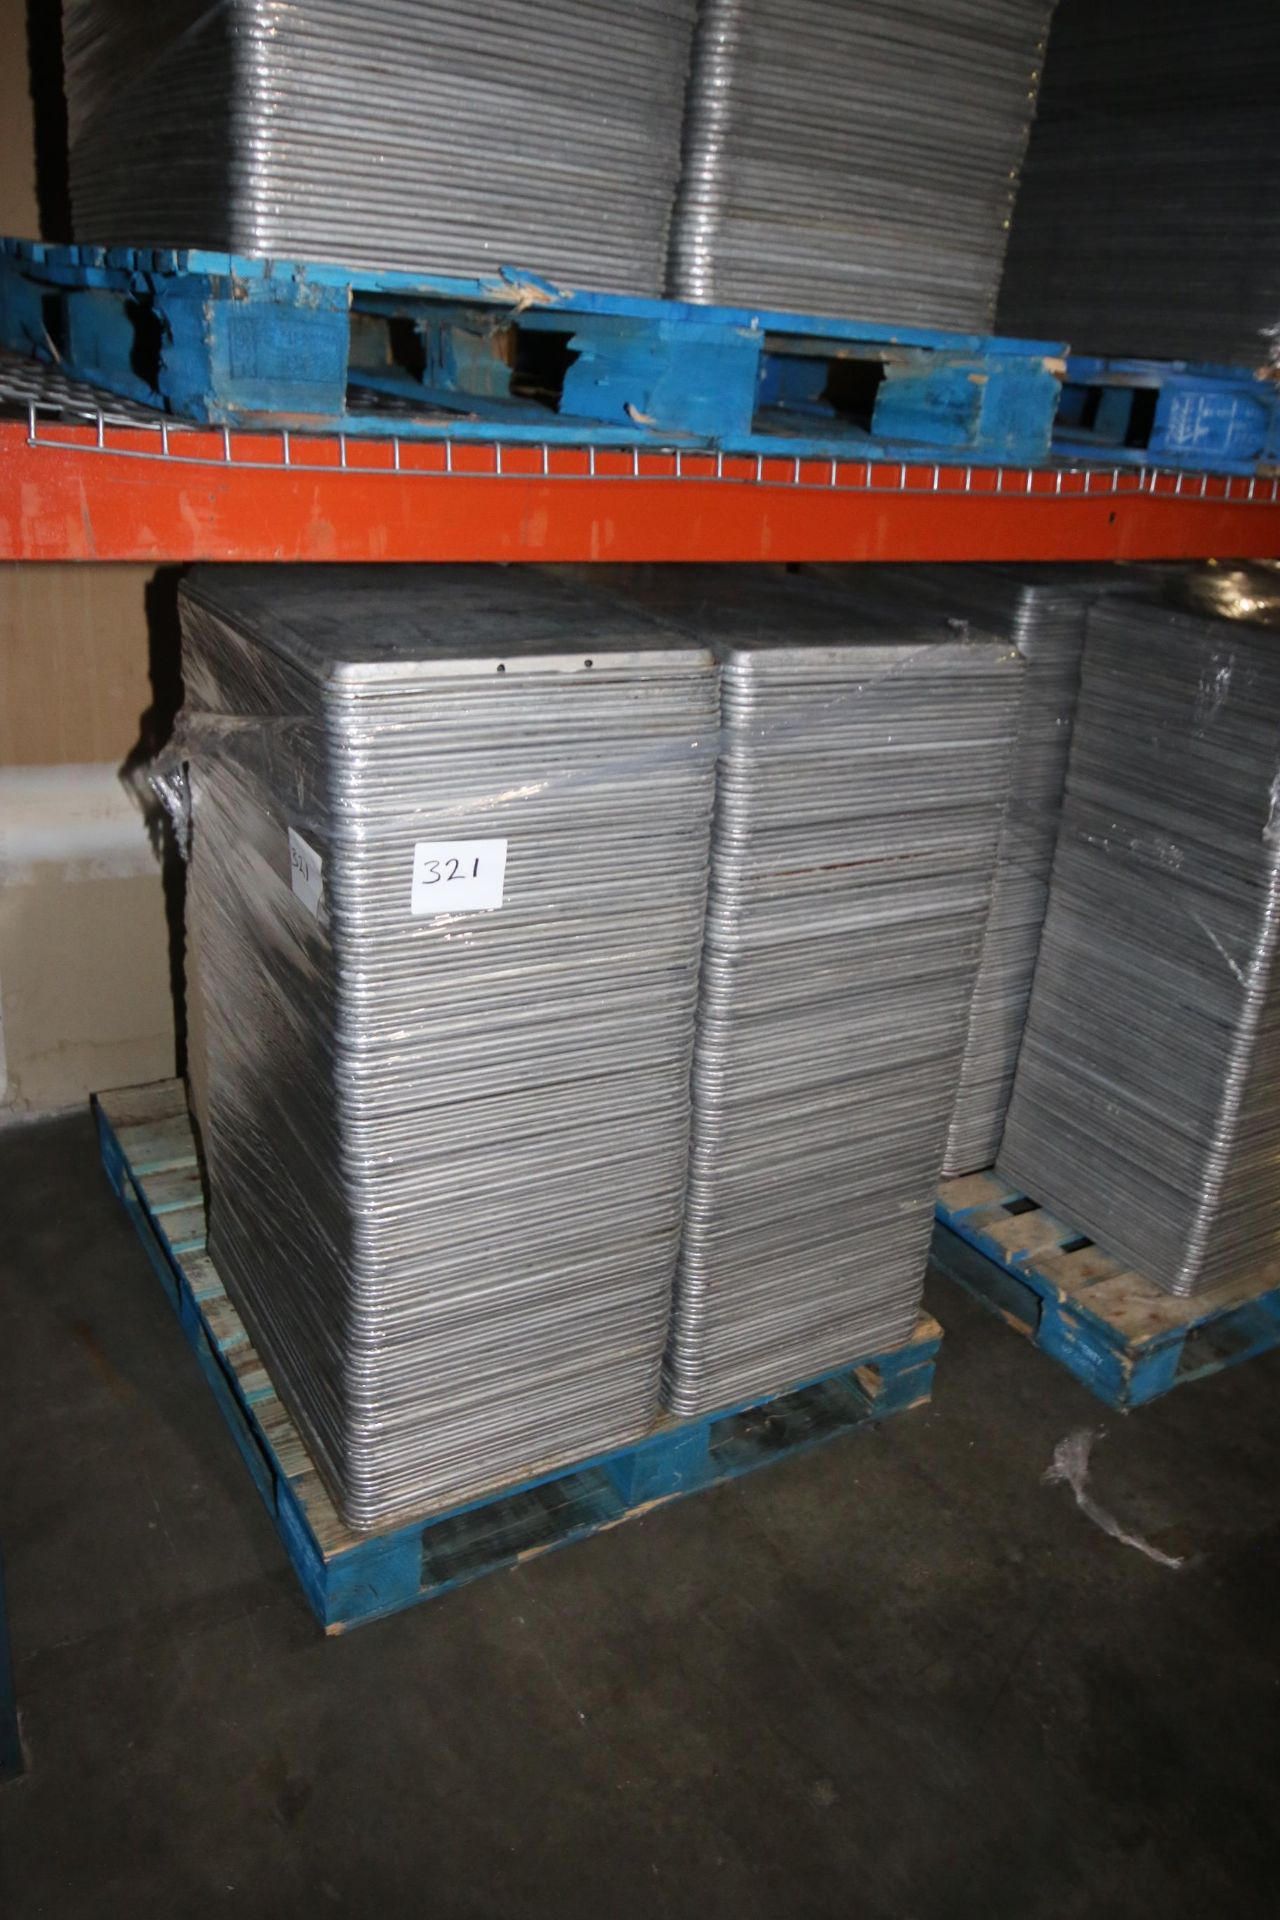 Regular Baking Pans, Internal Dims.: Aprox. 24" L x 16-1/4" W x 1" Deep, Located on (4) Pallets ( - Image 4 of 6